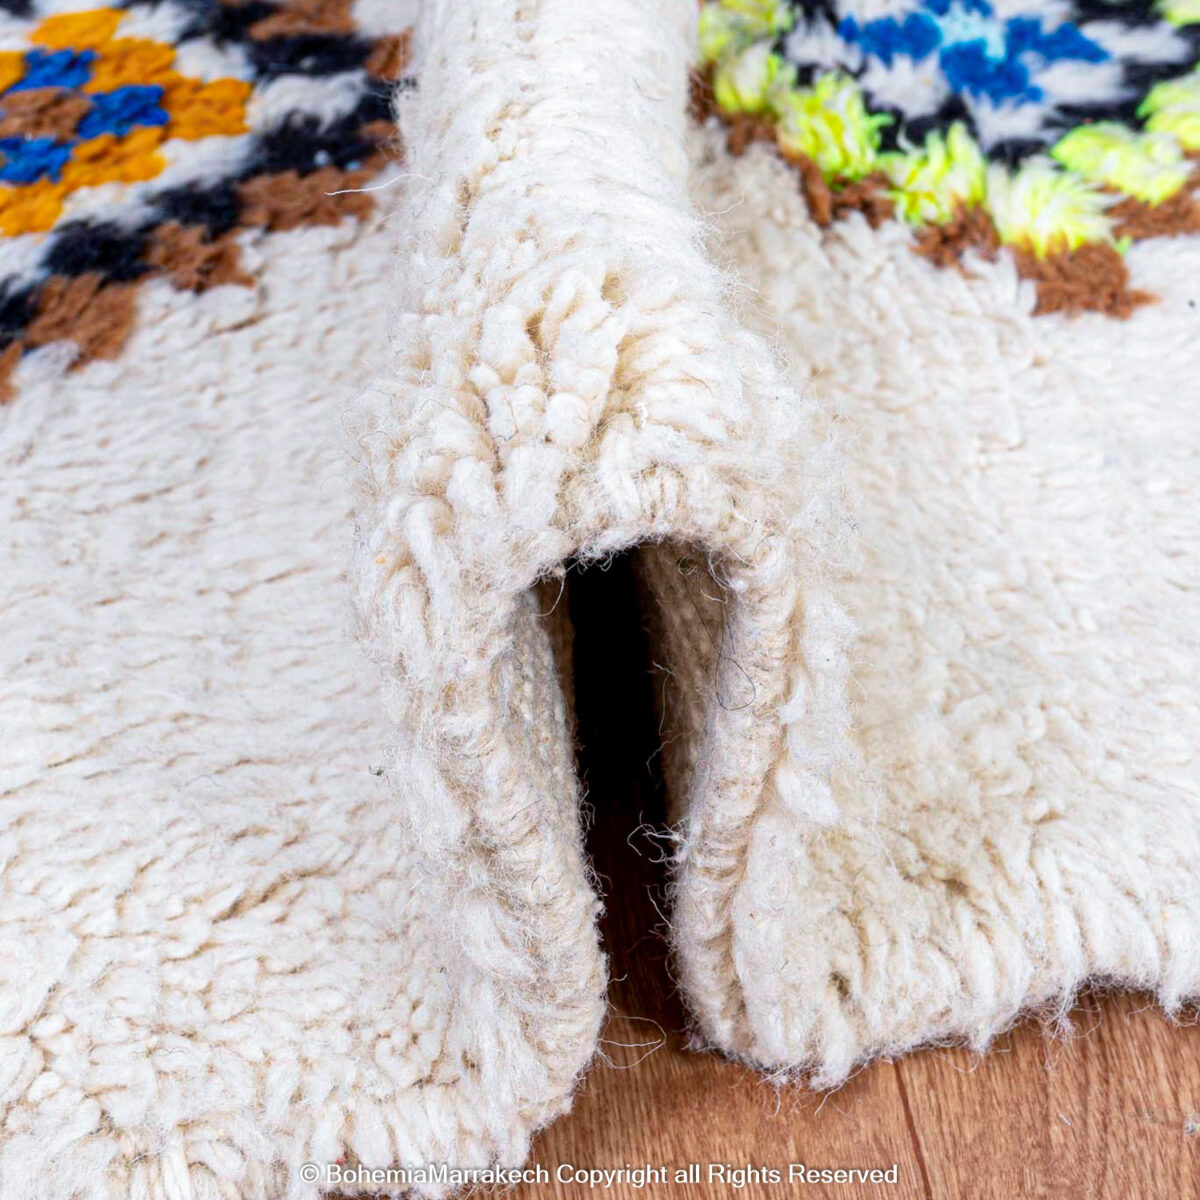 washable rugs, rugs that are washable, washable carpet rugs, 8x10 rugs, runner rugs, 8x10 area rugs, washable area rugs, washable floor rugs, area rugs that are washable, kids rugs, boho rug, ruggable's, outdoor rugs, ruggable rugs, kitchen rugs, living room rug, rugs in a living room, kitchen with rug, rug sizes, carpet sizes, rug dimensions, rug measurements, carpet rug sizes, indoor outdoor rugs, outdoor patio rugs, outdoor rugs for porch, indoor and outdoor rugs, washable accent rugs, porch rugs outdoor, exterior patio rugs, kitchen runner rugs, kitchen rugs and runners, area rug for living room, kitchen carpet runner, large room rug, carpet runner in kitchen, kitchen with runner rug, patio rugs, children's rugs, rug patio, machine washable rugs, washable runner rugs, kitchen runner, machine washable area rugs, runner washable rugs, washable carpet runners, machine washable carpet, washable rugs and runners, machine washable floor rugs, rugs washable runners.